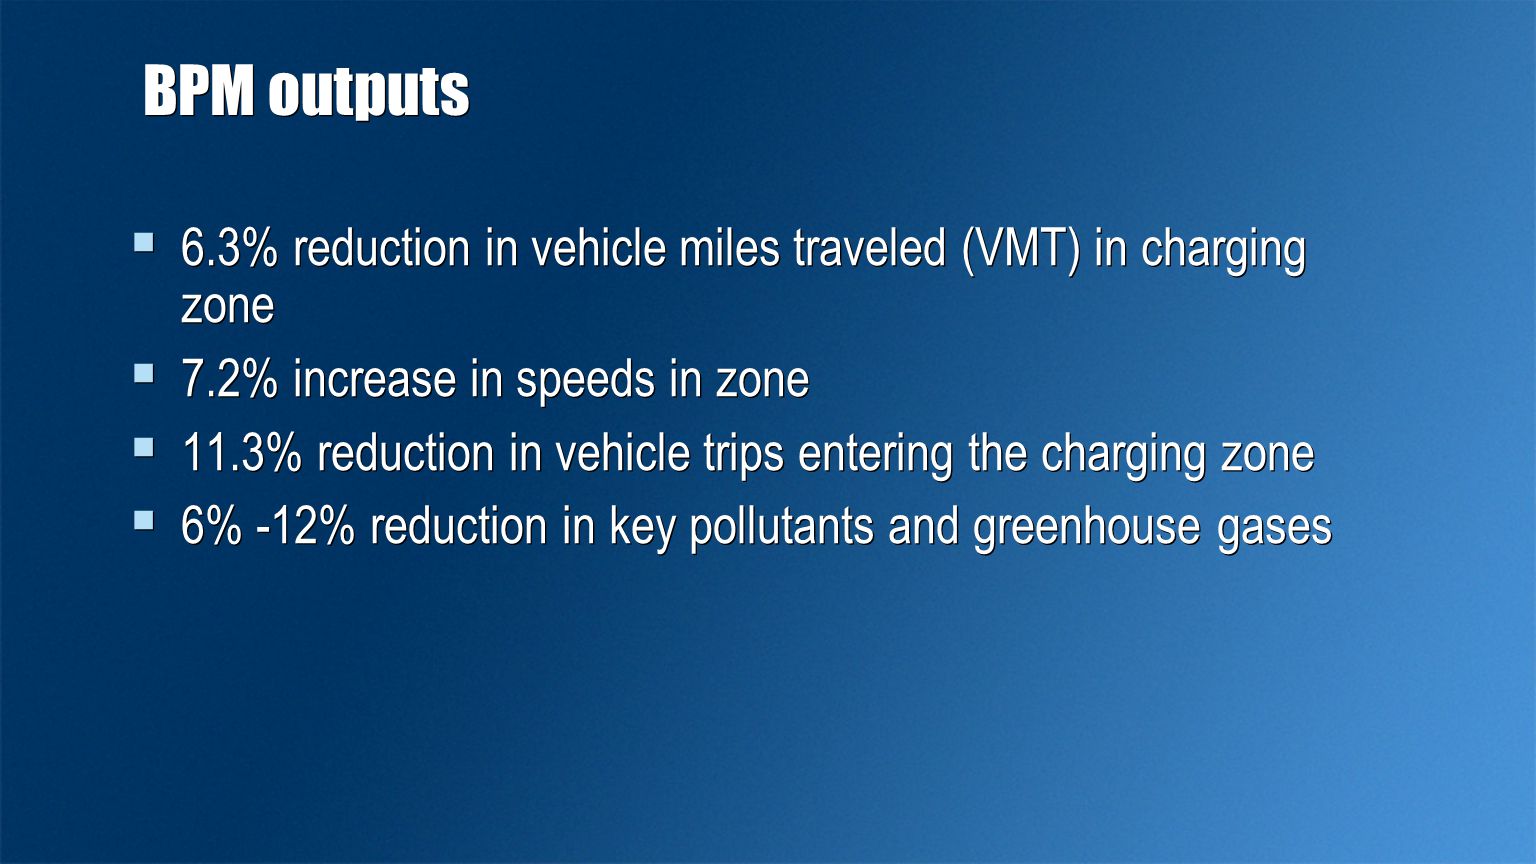  6.3% reduction in vehicle miles traveled (VMT) in charging zone  7.2% increase in speeds in zone  11.3% reduction in vehicle trips entering the charging zone  6% -12% reduction in key pollutants and greenhouse gases  6.3% reduction in vehicle miles traveled (VMT) in charging zone  7.2% increase in speeds in zone  11.3% reduction in vehicle trips entering the charging zone  6% -12% reduction in key pollutants and greenhouse gases